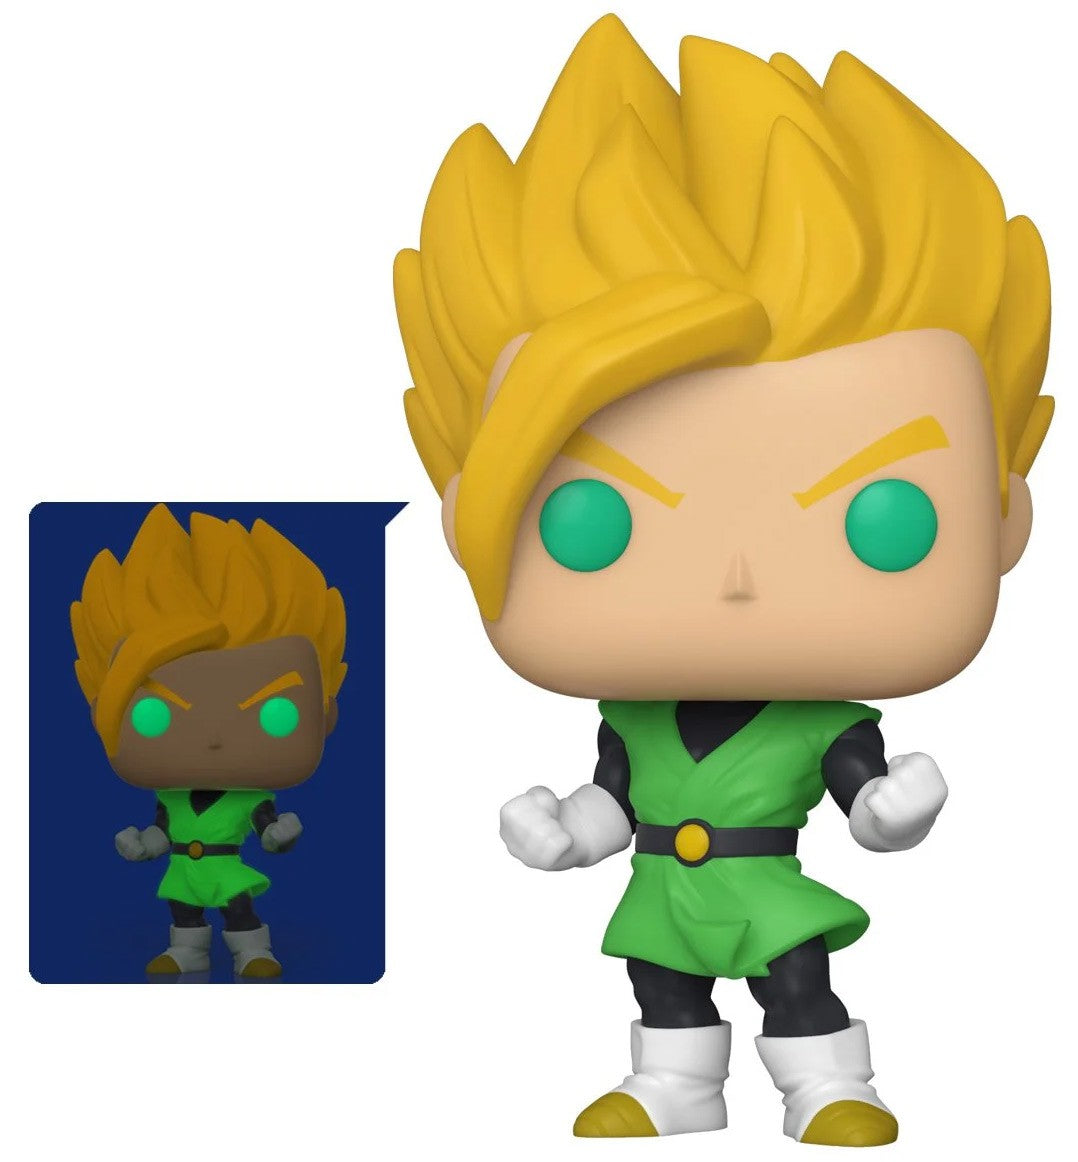 Product Image of Funko Pop! Animation: Dragon Ball Z - Super Saiyan Gohan Glow-In-the-Dark with Pop! Protector